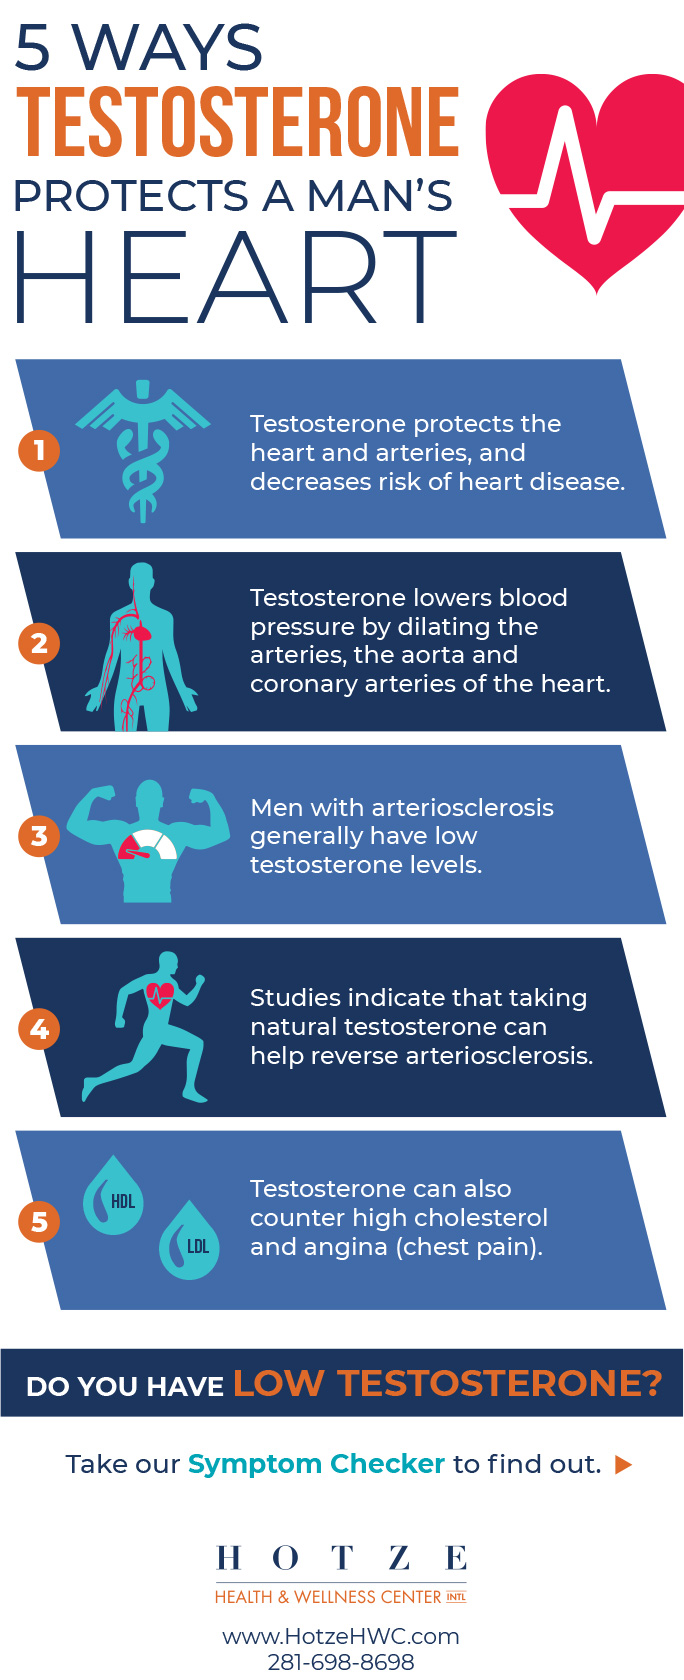 5 Ways Testosterone Protects a Man's Heart